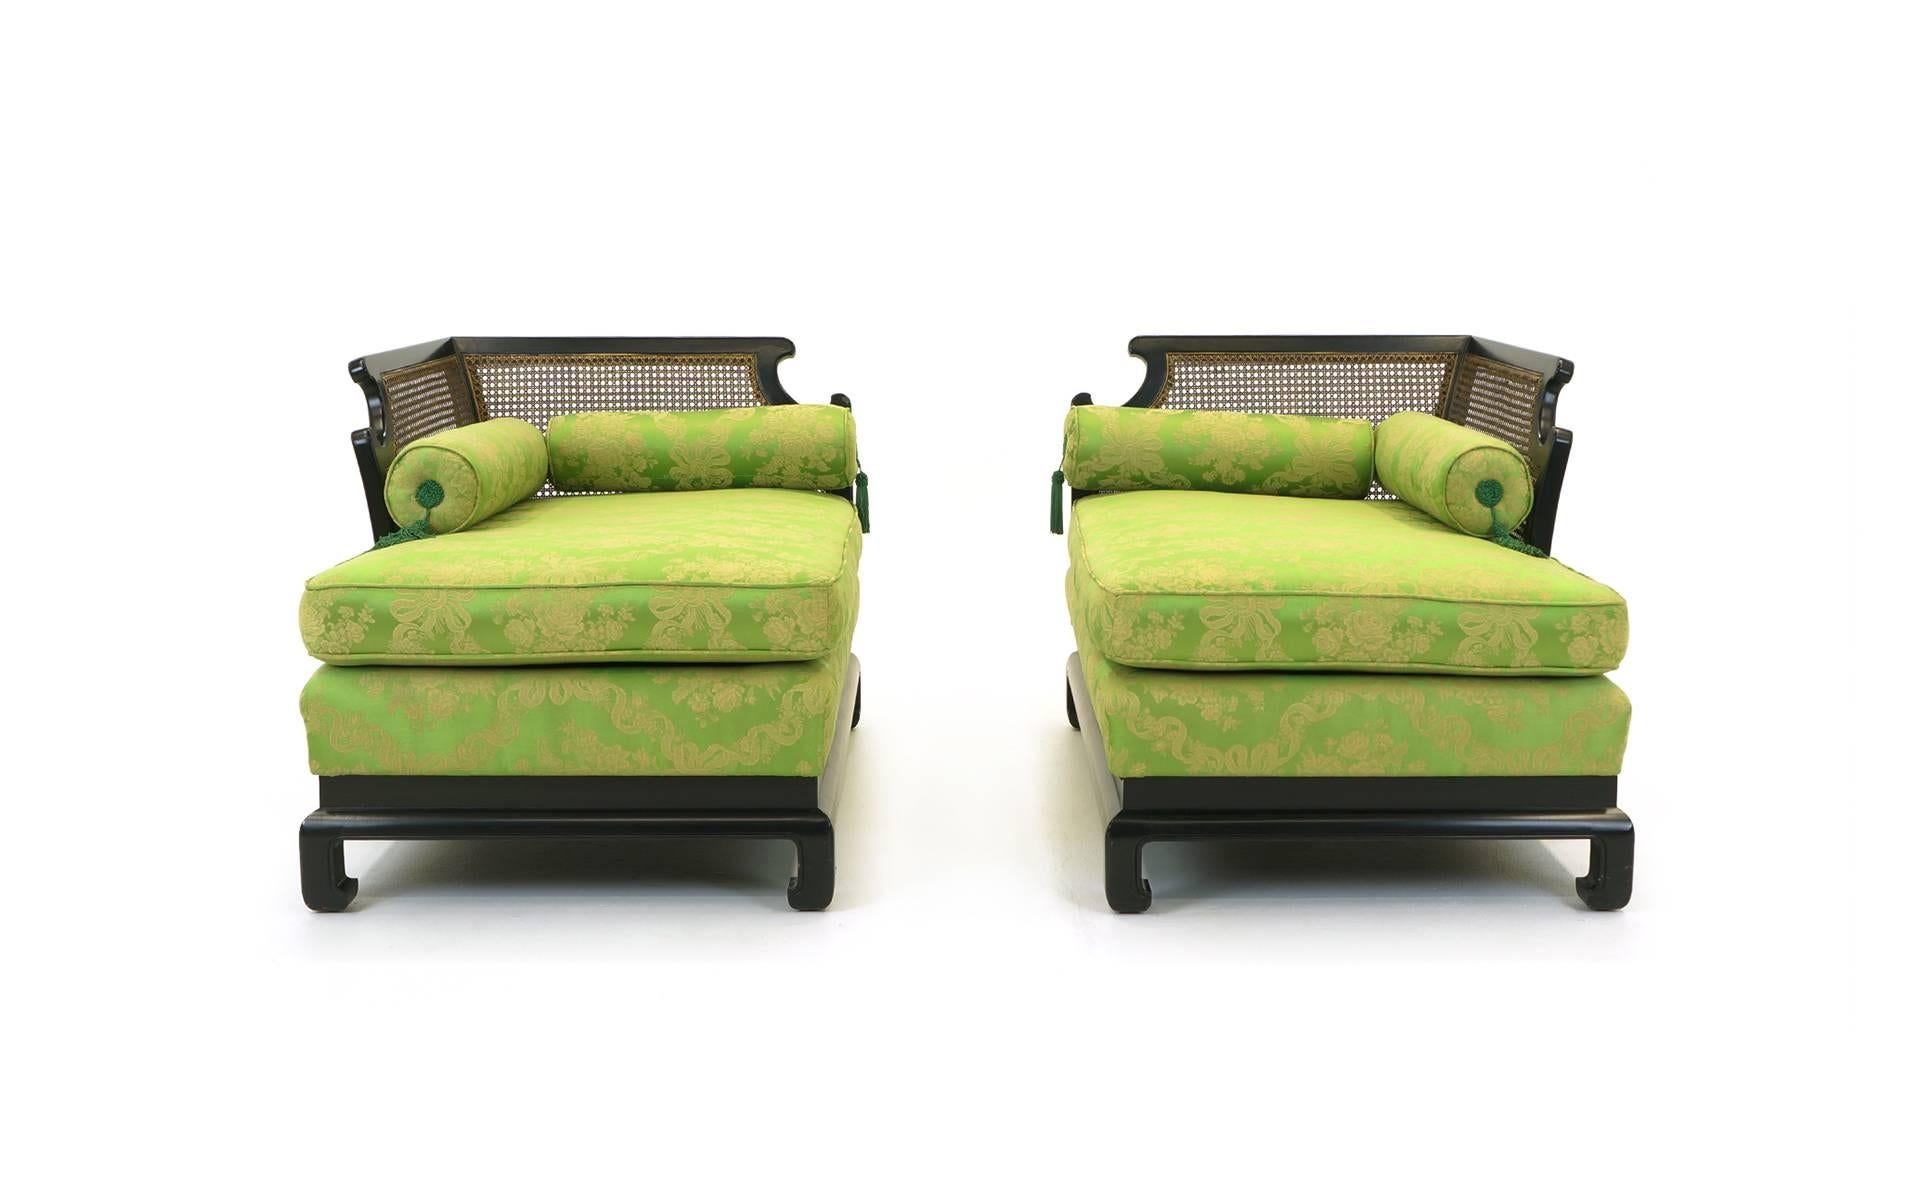 Pair of Asian chaises with original fabric that looks virtually new. However, the foam interior has become hard. We decided to leave it up to the next owner whether to re-foam the original upholstery or redo the set completely (which is reflected in